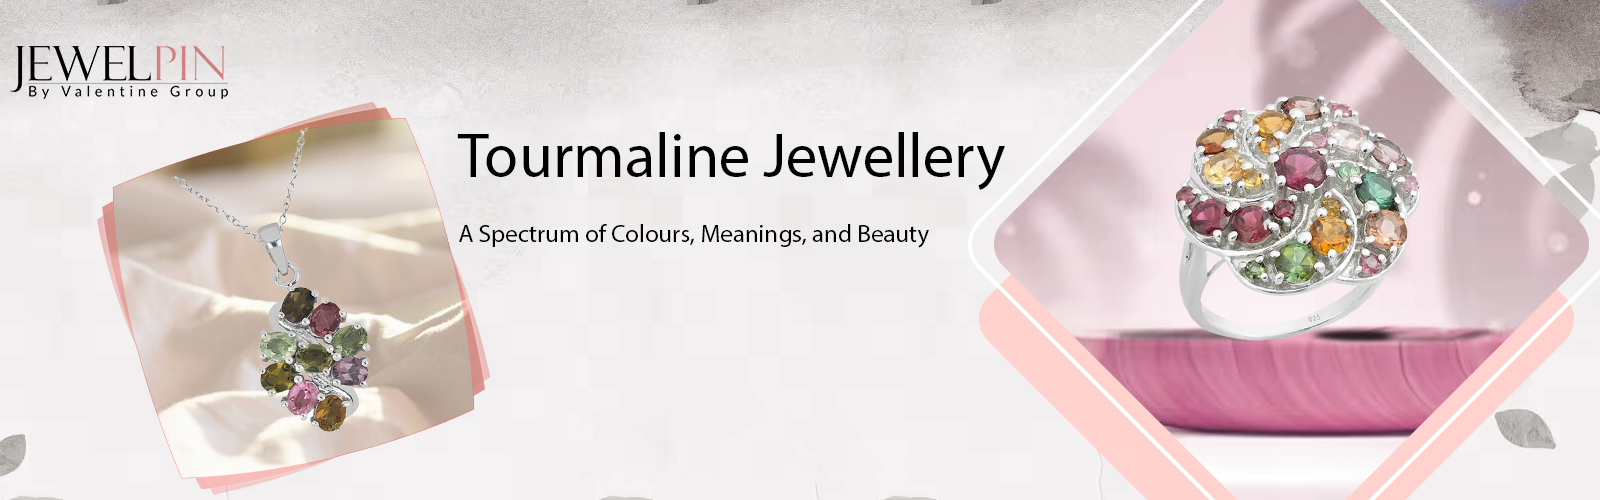 Tourmaline Jewellery A Spectrum of Colours, Meanings, and Beauty - JewelPin